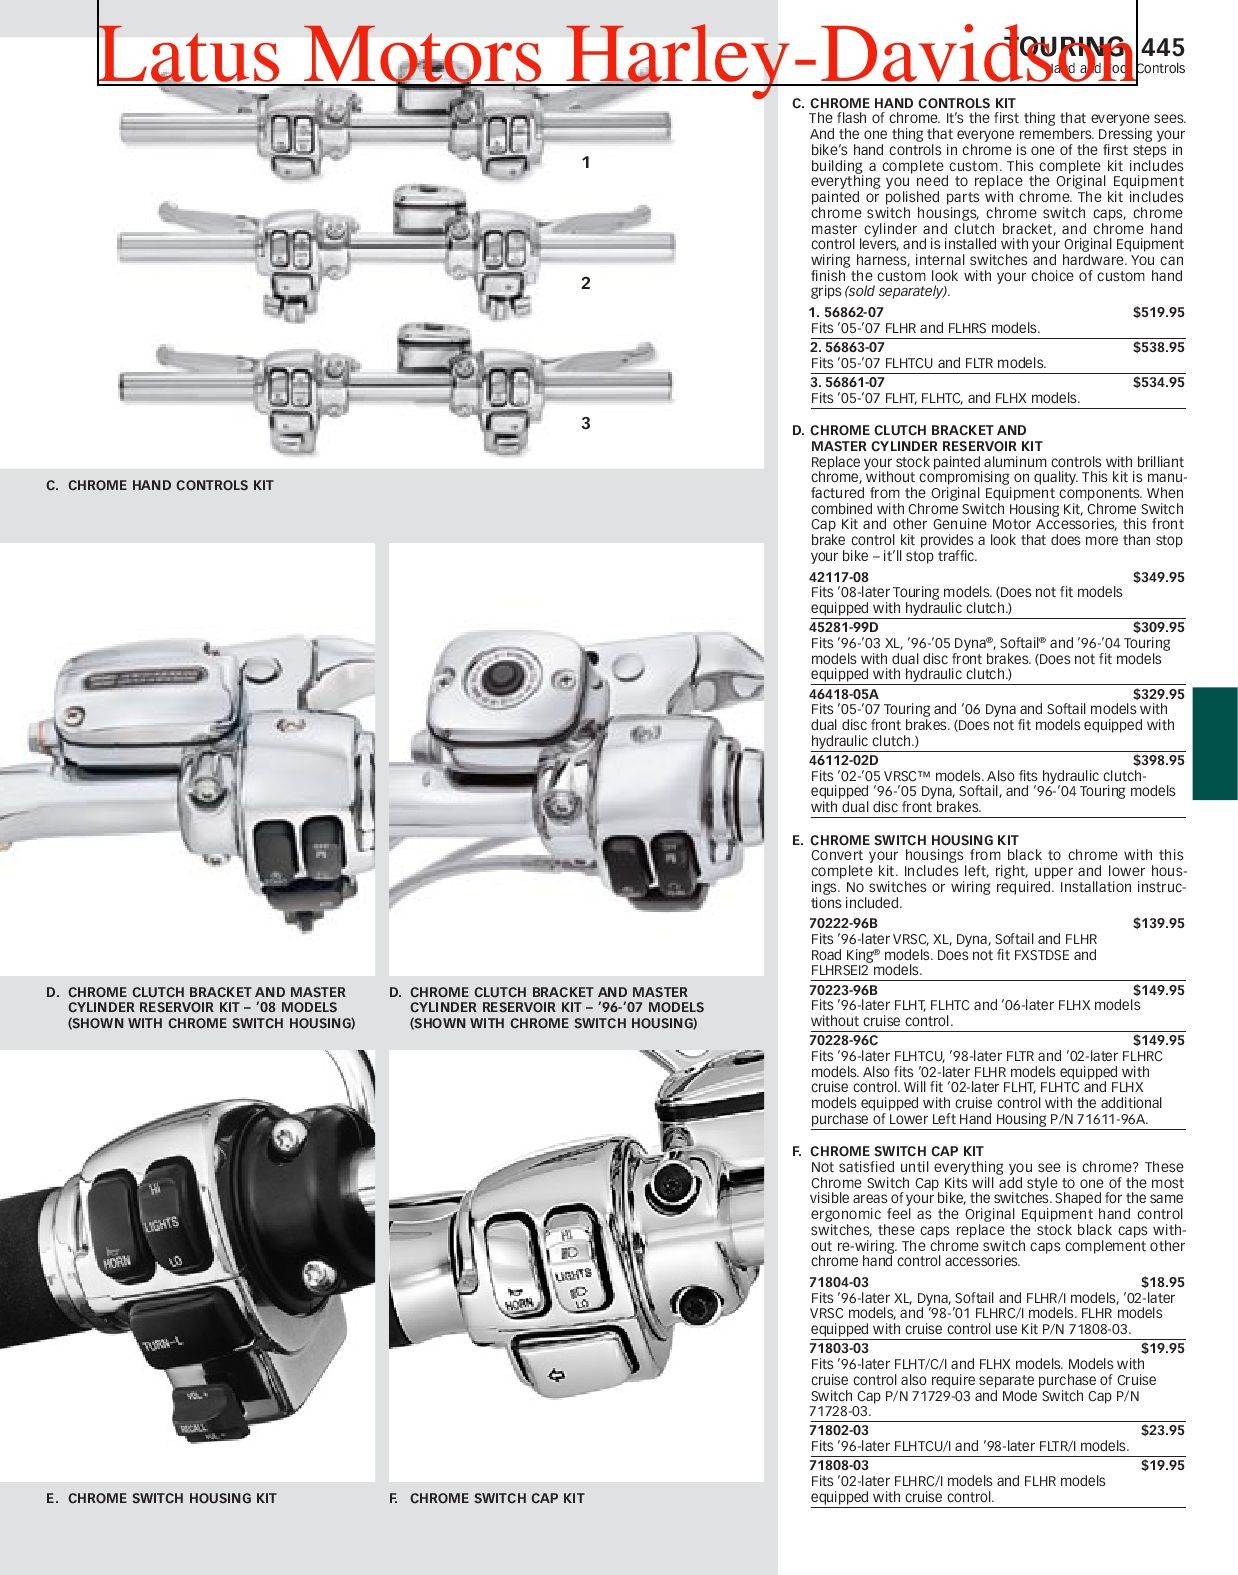 Harley Evo Engine Diagram Part 2 Harley Davidson Parts and Accessories Catalog by Harley Of Harley Evo Engine Diagram